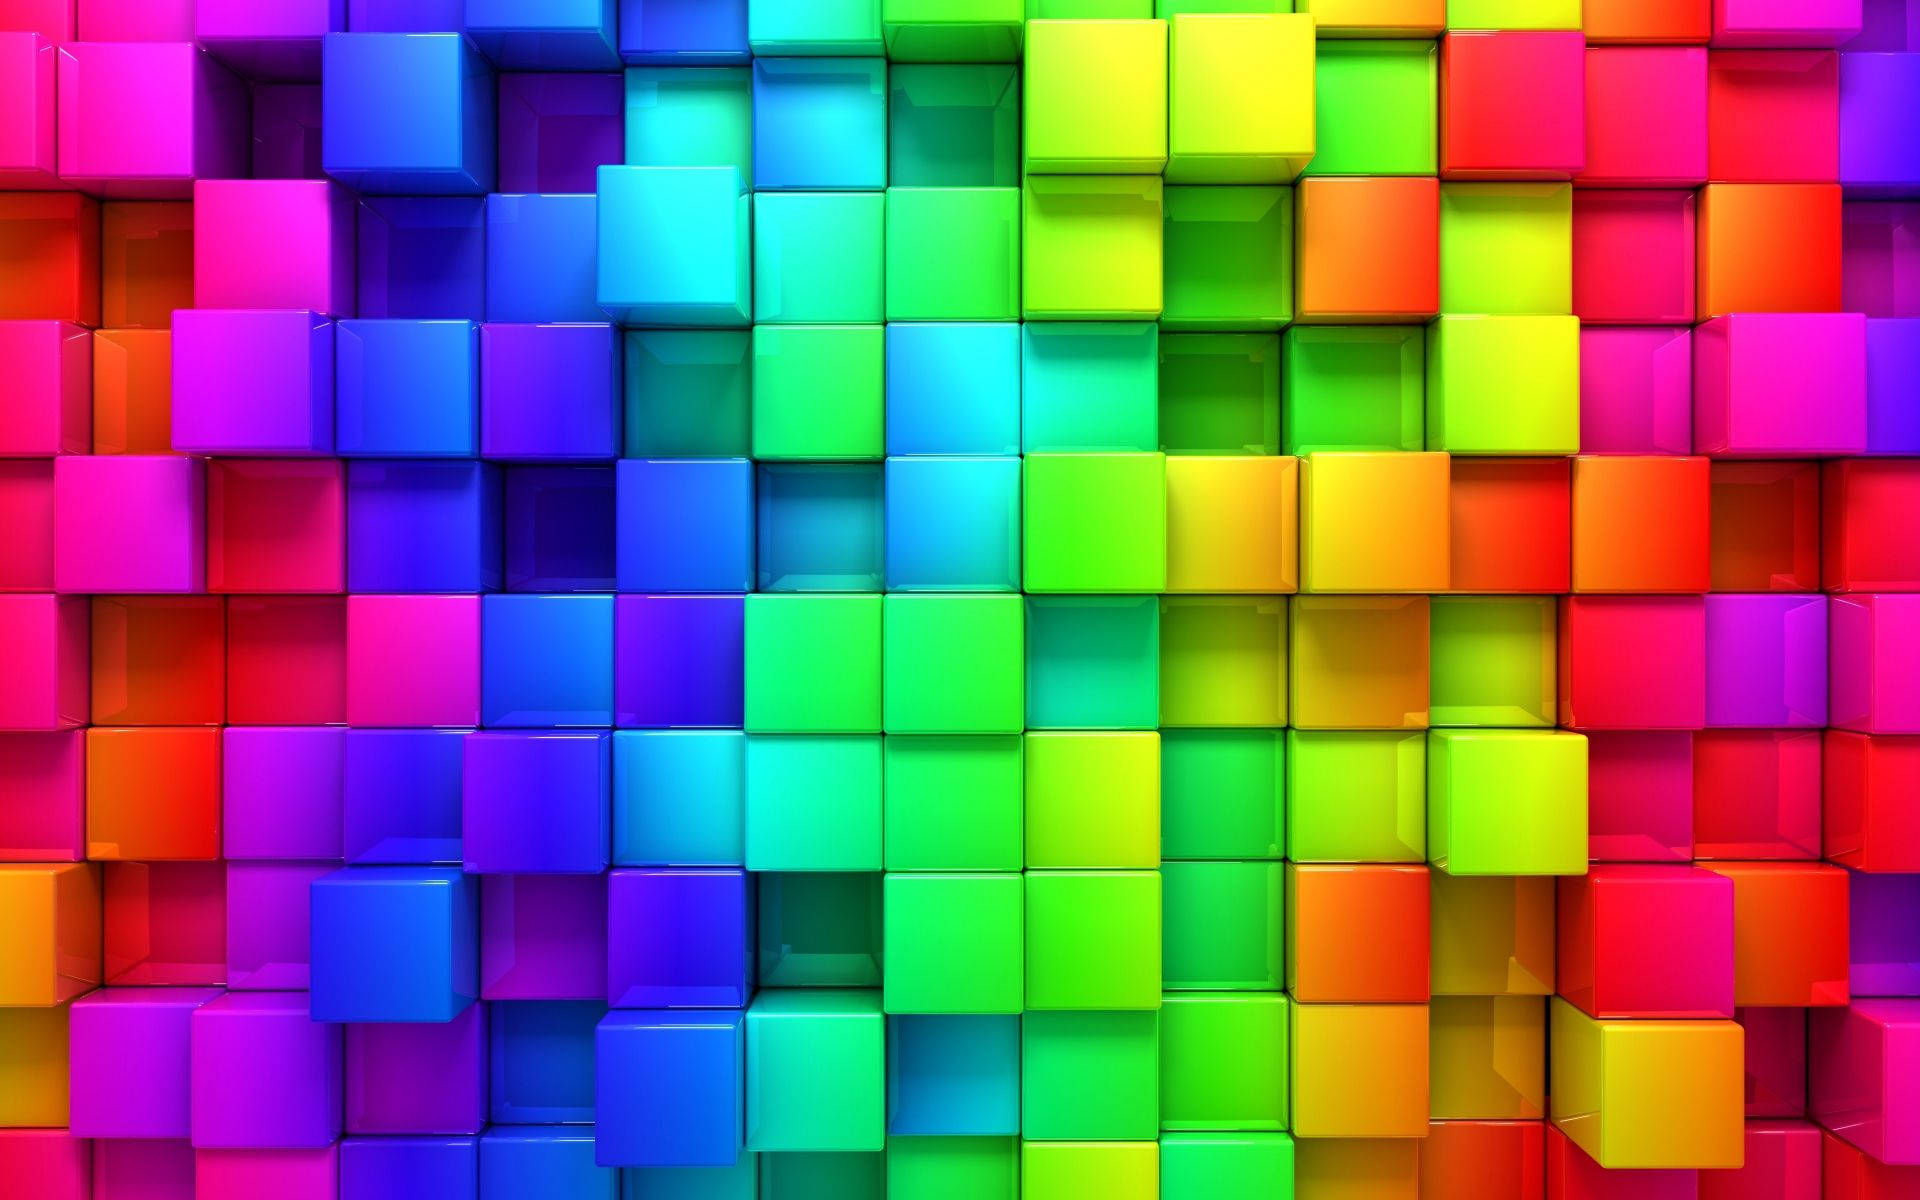 Make a statement with our vibrant and modern Rainbow Cubes Mural wallpaper. Wallpaper